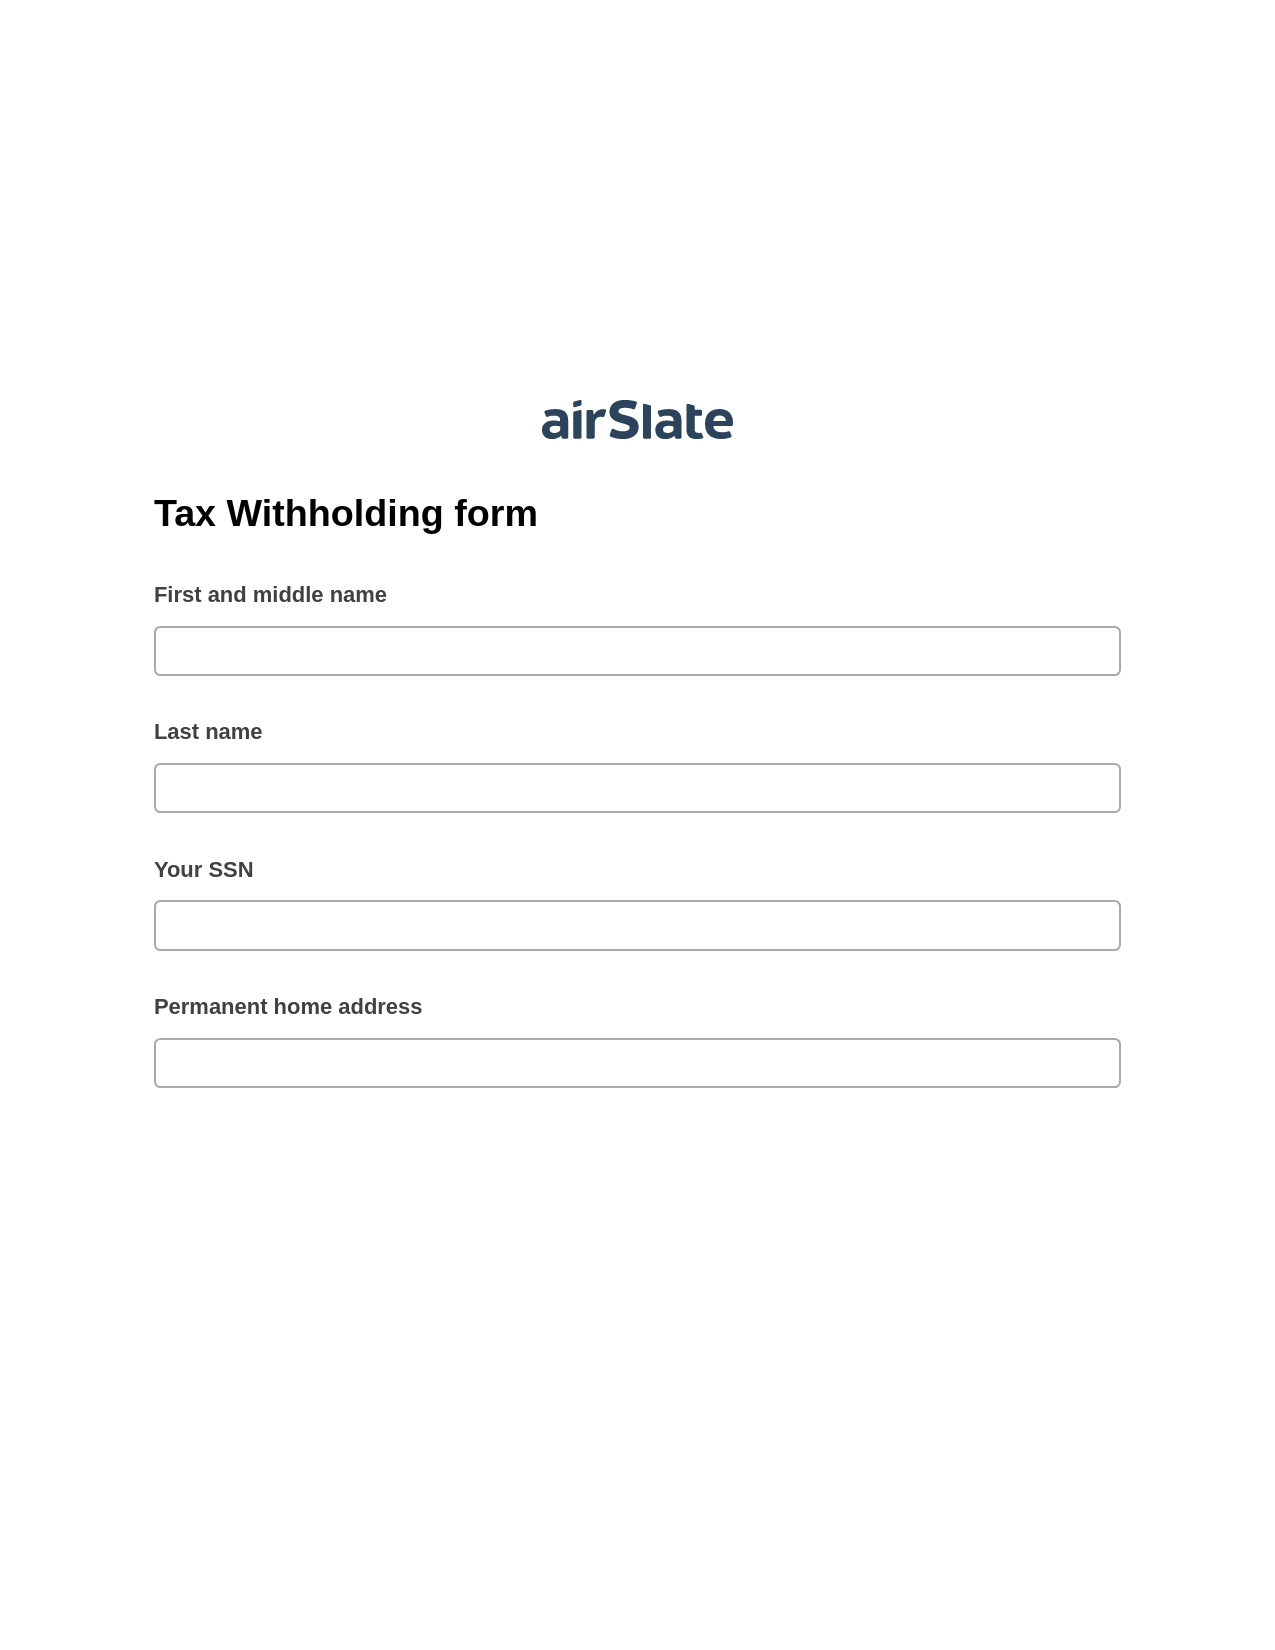 Multirole Tax Withholding form Pre-fill Document Bot, Create NetSuite Records Bot, Export to NetSuite Bot